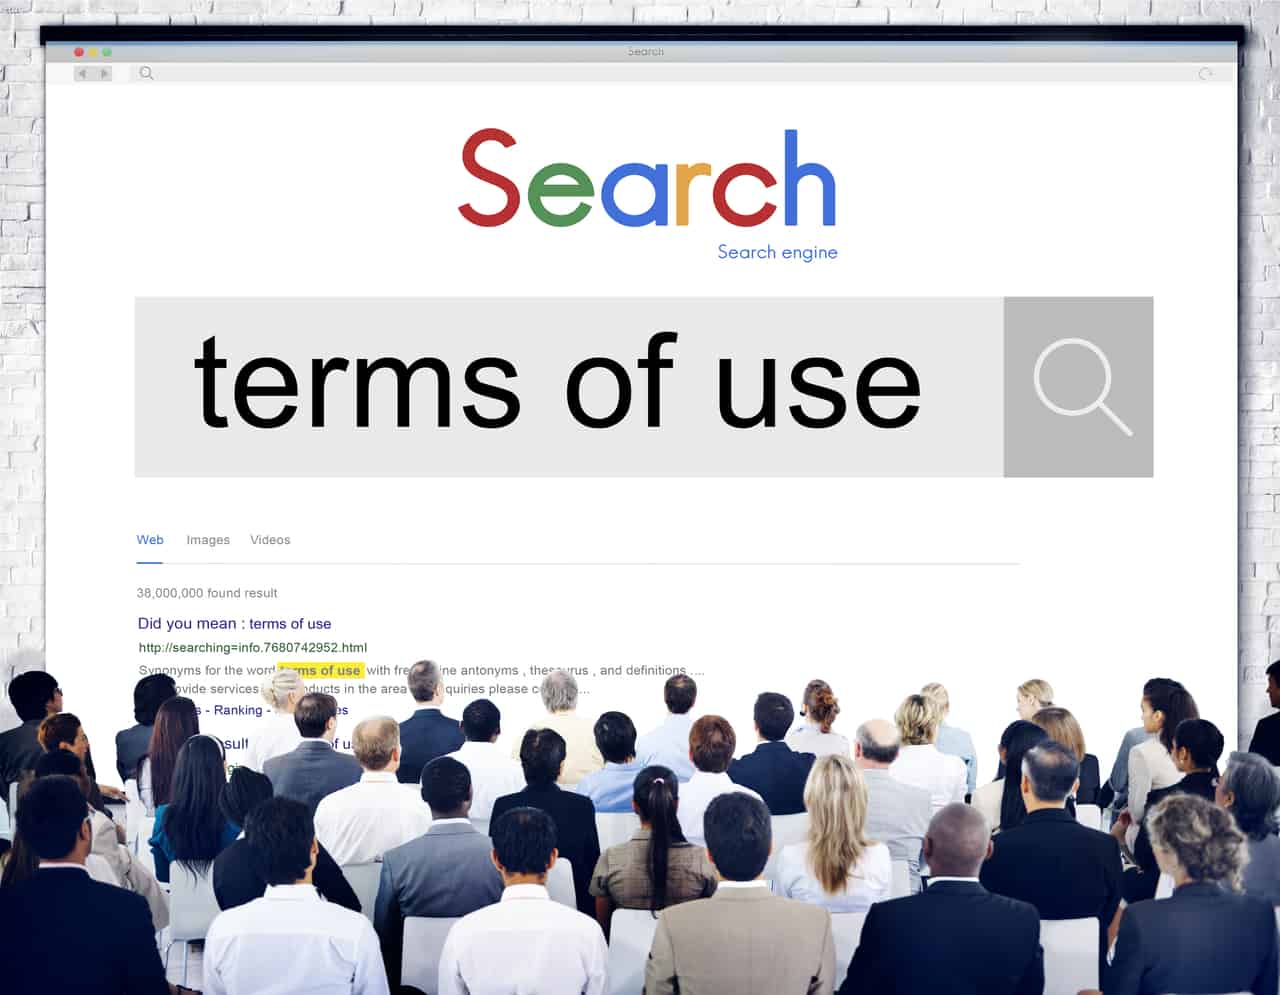 search engine search terms